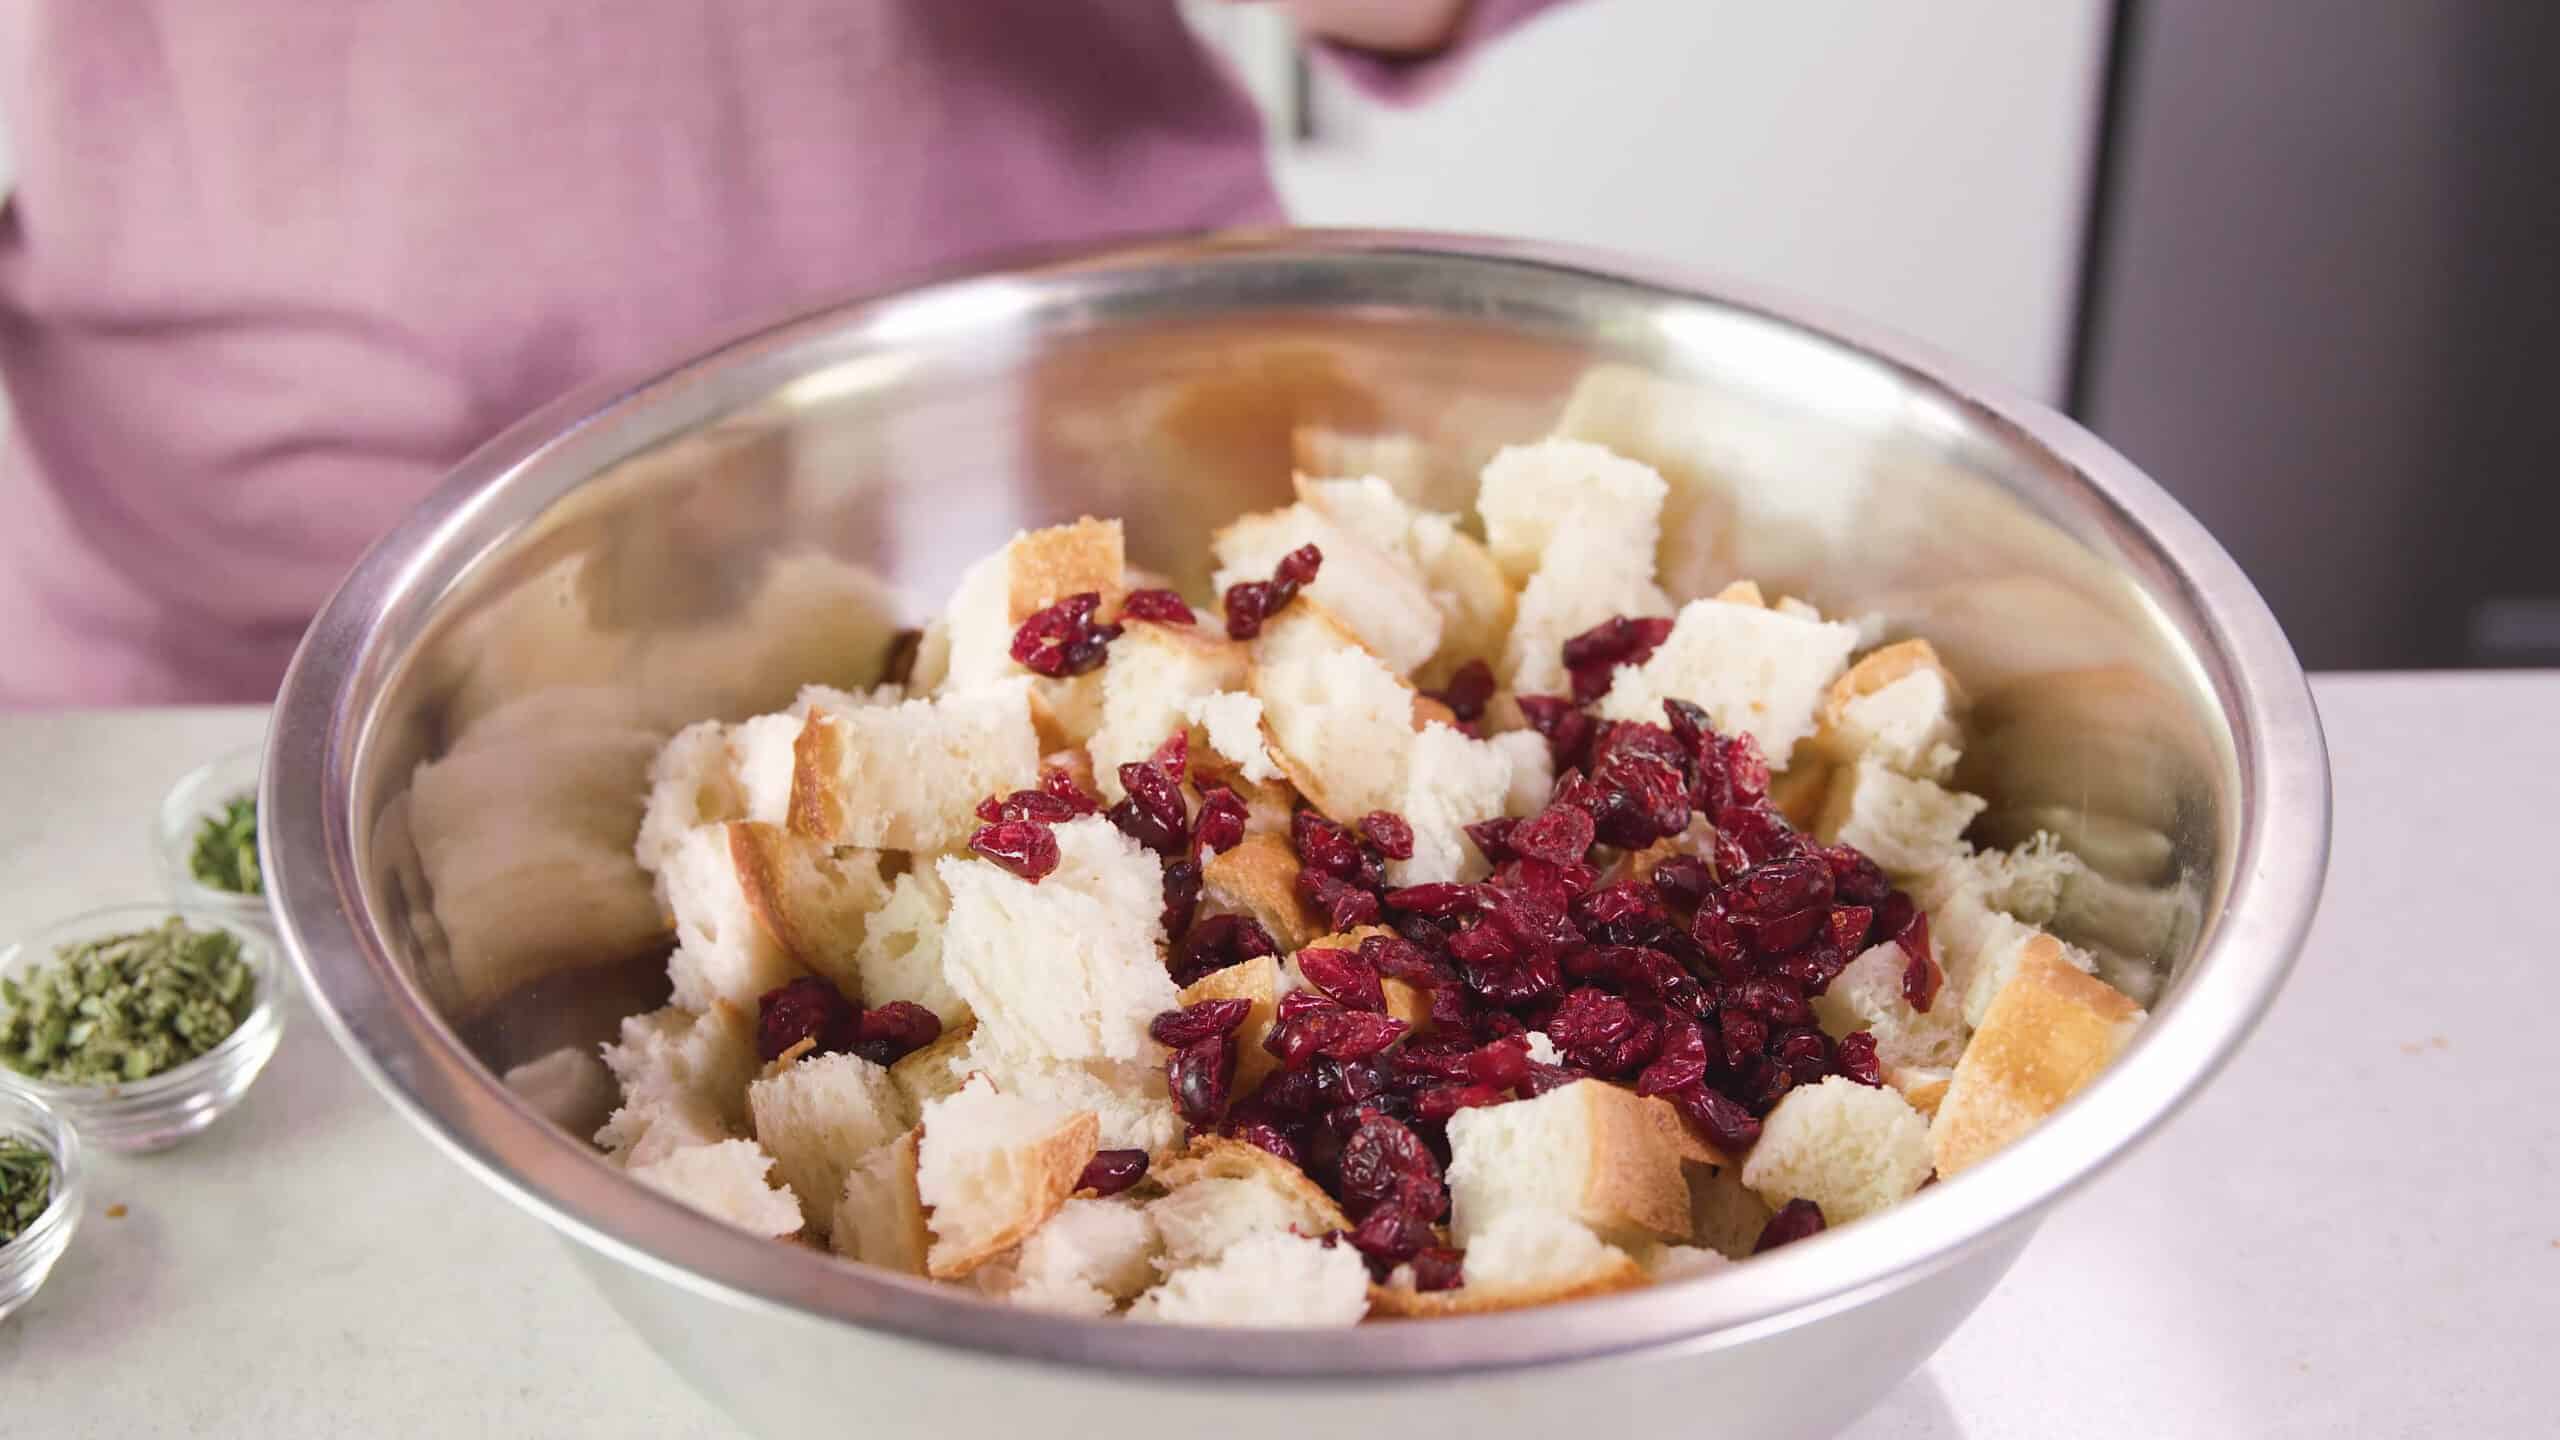 Angled view of stainless steel mixing bowl filled with diced bite-sized portions of French bread covered with dried cranberries.